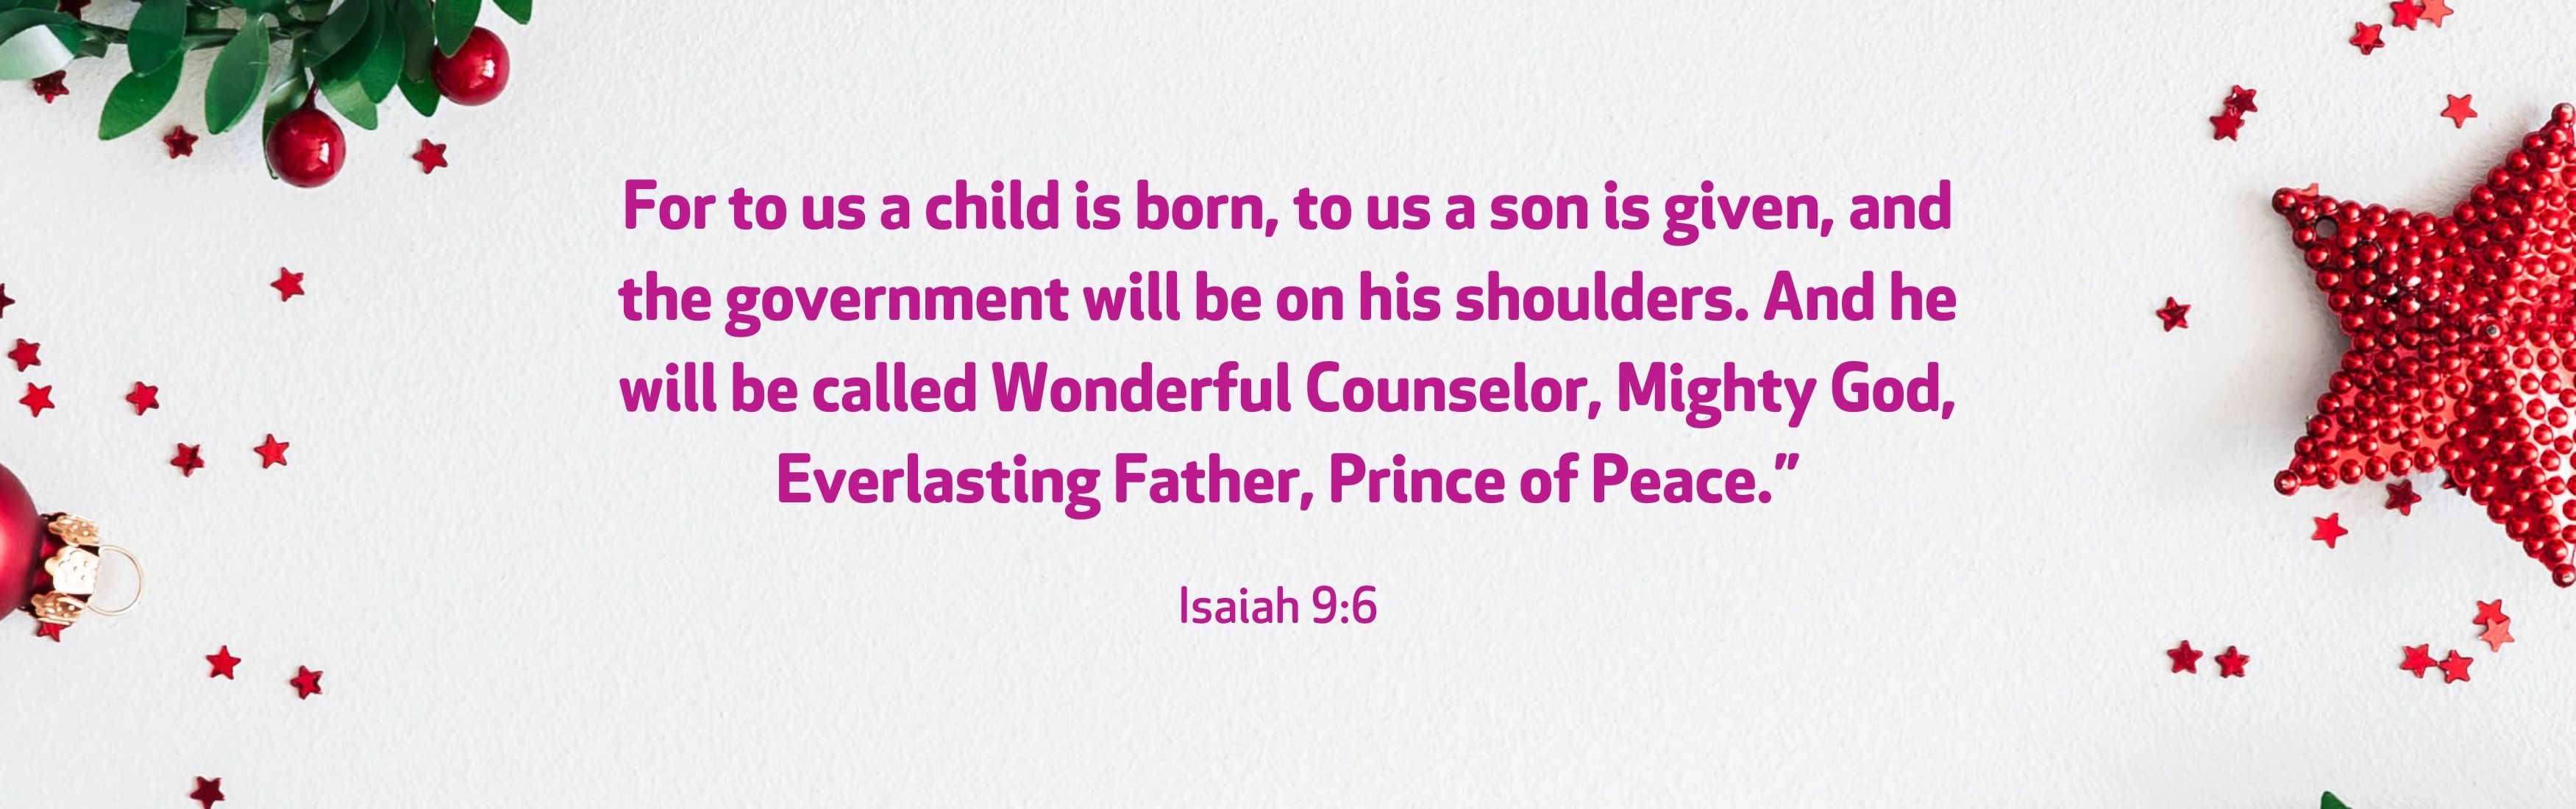 “For to us a child is born, to us a son is given, and the government will be on his shoulders. And he will be called Wonderful Counselor, Mighty God, Everlasting Father, Prince of Peace.” Isaiah 9:6   